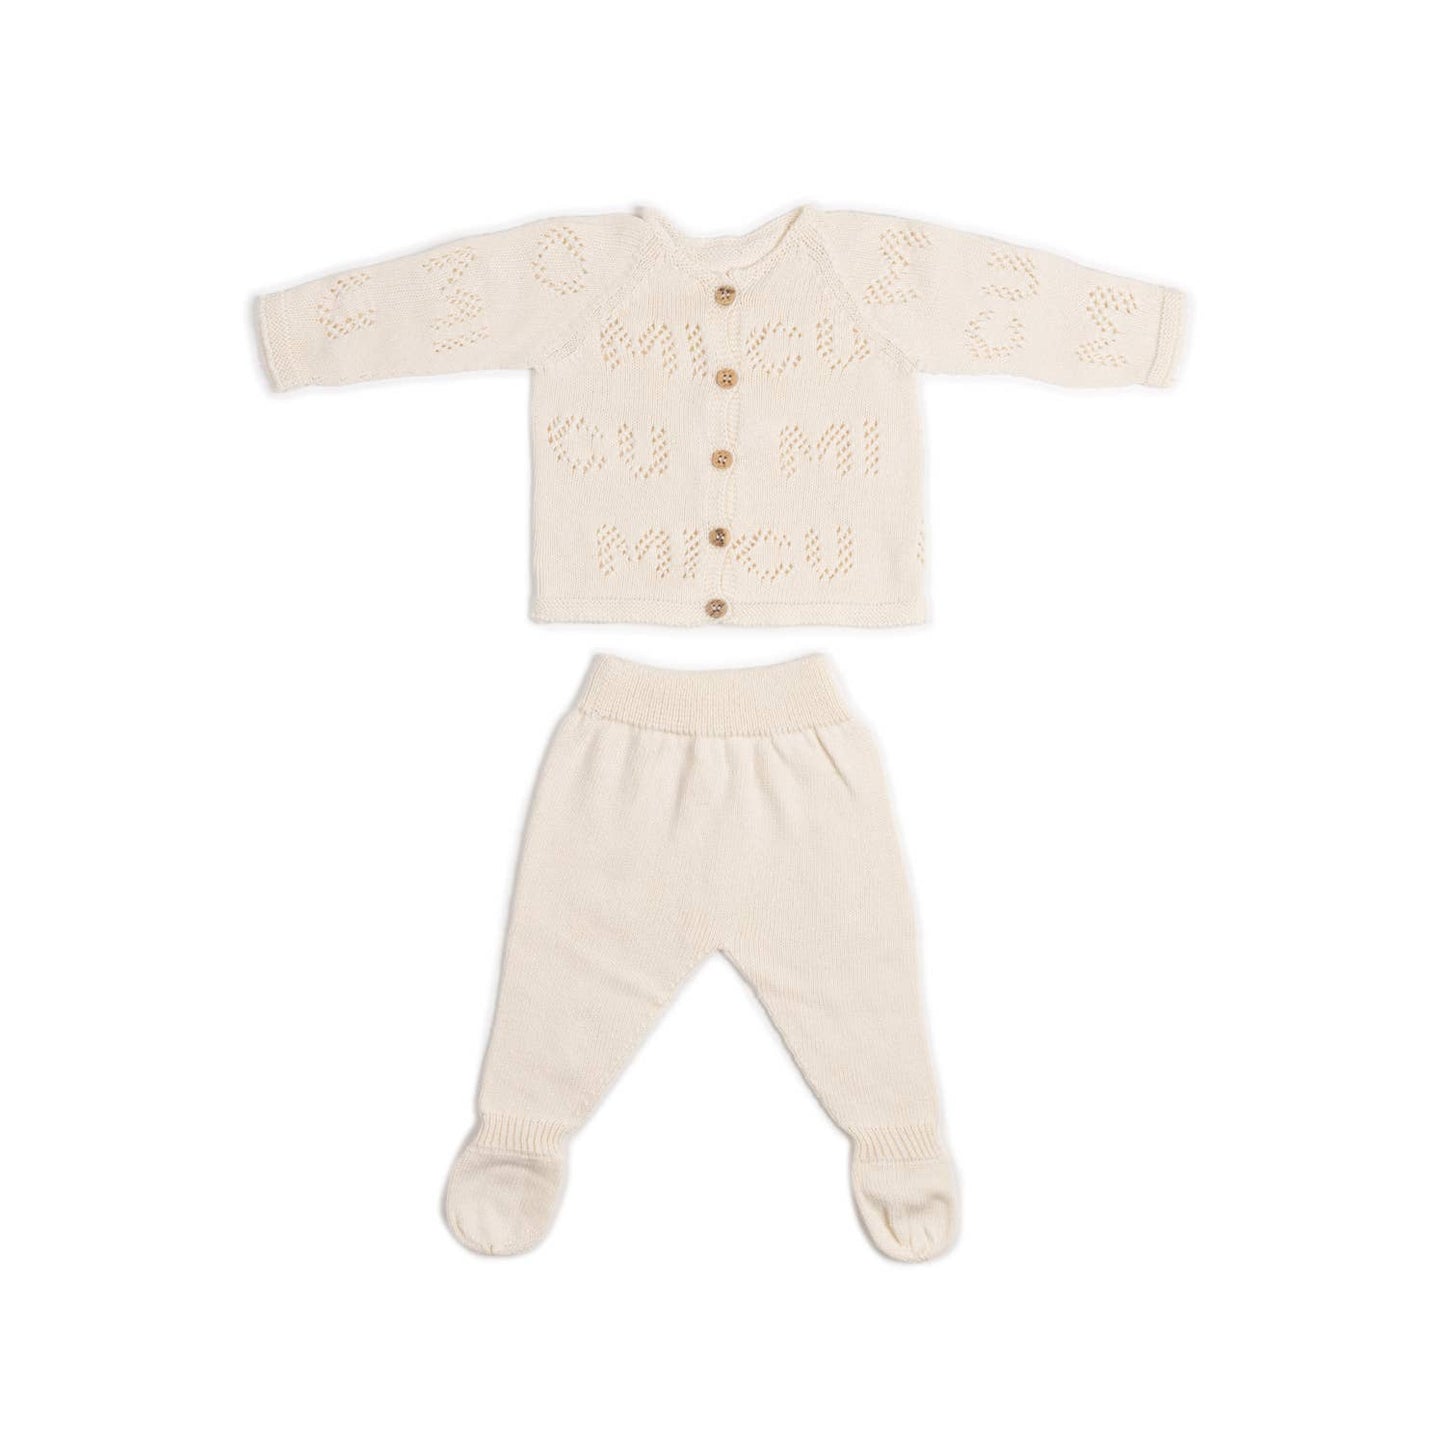 Baby knit set - cardigan and pants with letters organic cotton